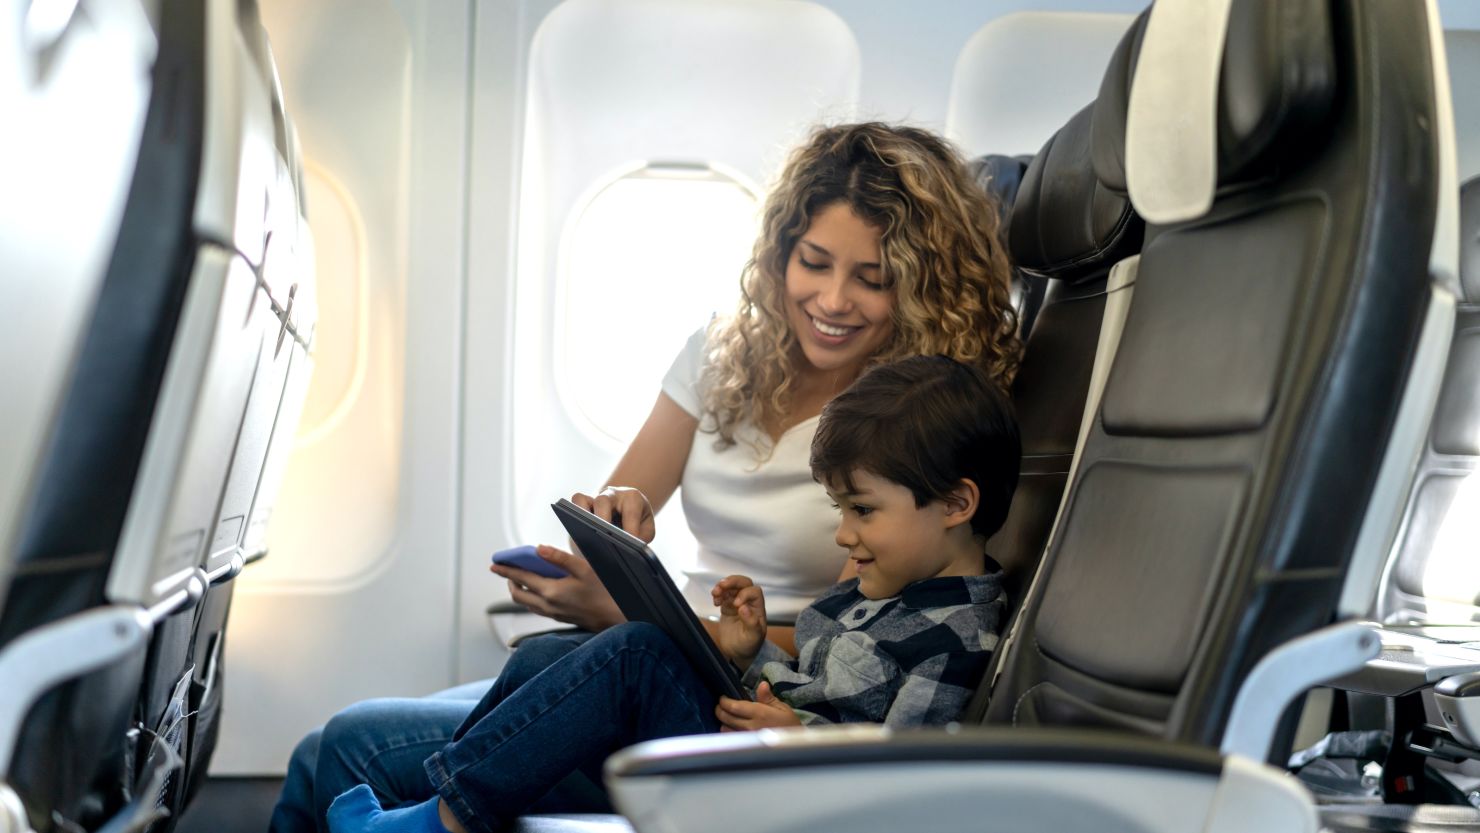 Ways to keep a 1.5 year old occupied on plane? : r/toddlers